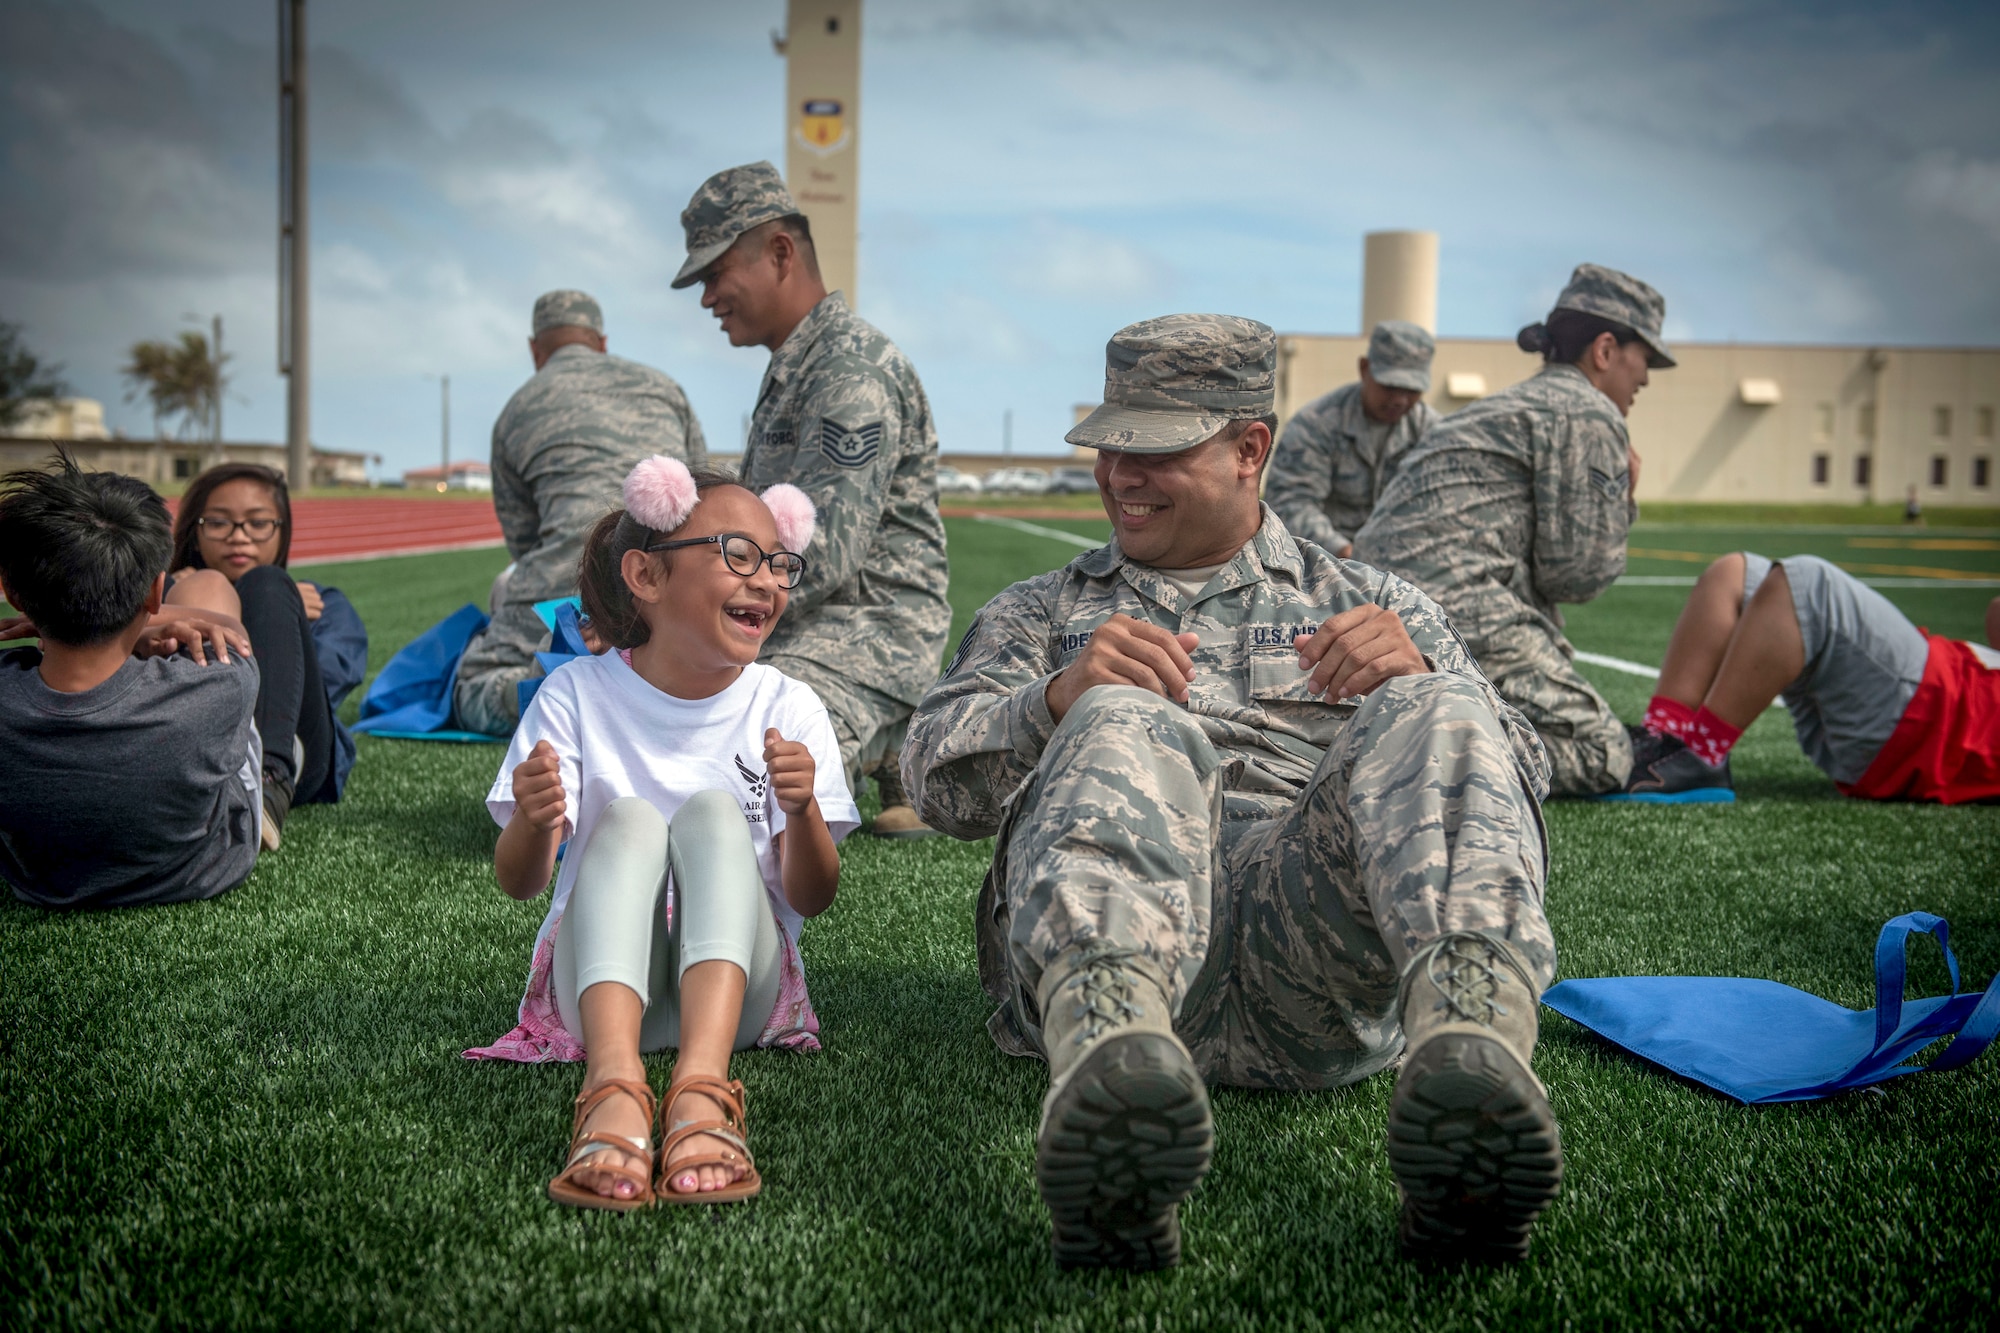 Air Force reservists assigned to the 44th Aerial Port Squadron, introduce military children to deployment processing procedures during Operation Inafa’ Maolek at Andersen Air Force Base, Guam, May 5, 2018. Military families shared a playful version of military processing to introduce children of deploying reservists to what their parents will experience when preparing for their deployment. The Chamorro term “Inafa' Maolek” literally translates into ‘to make’ (inafa’) ‘good’ (maolek). It describes the concept of restoring harmony or order. (U.S. Air Force photo by Staff Sgt. Alexander W. Riedel)